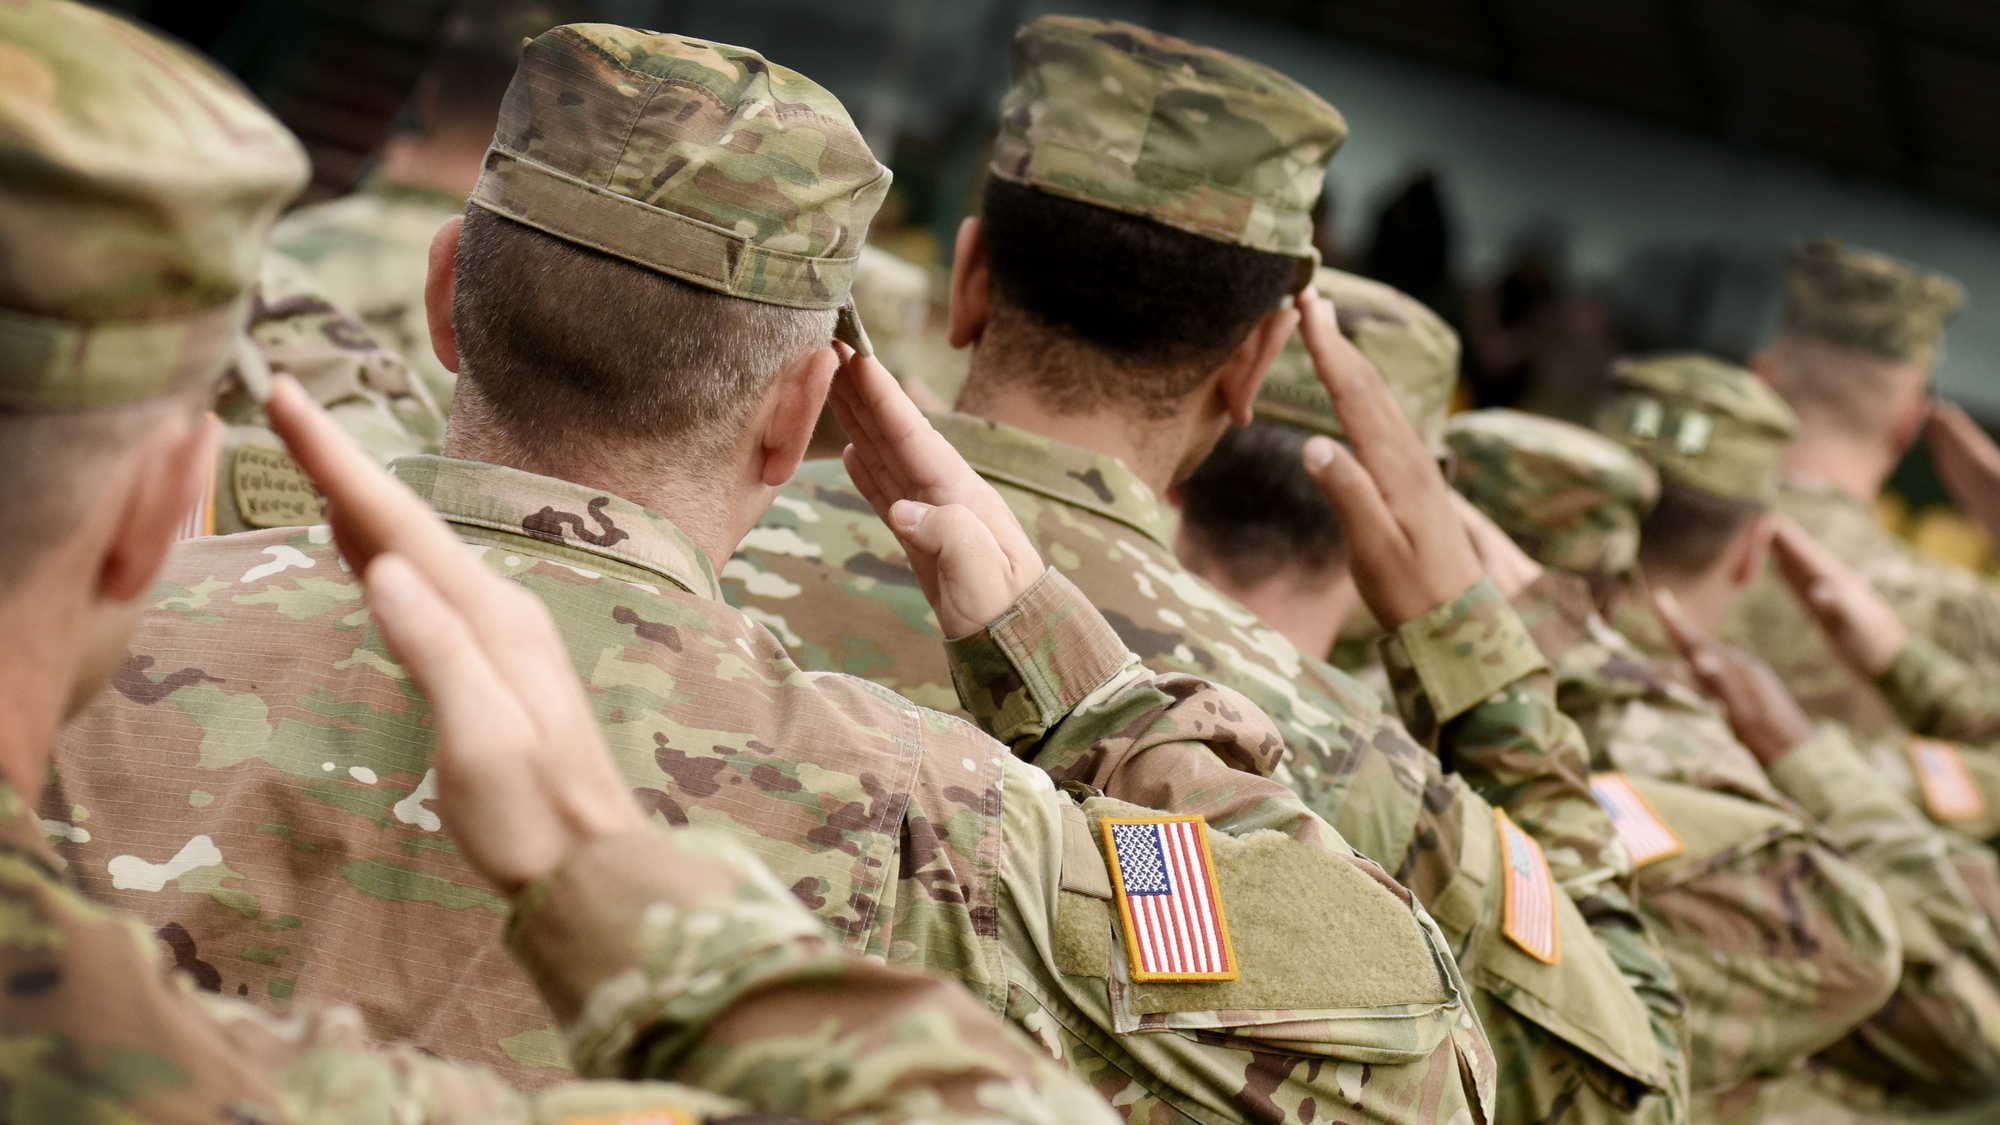 Over shoulder image of US soldiers saluting